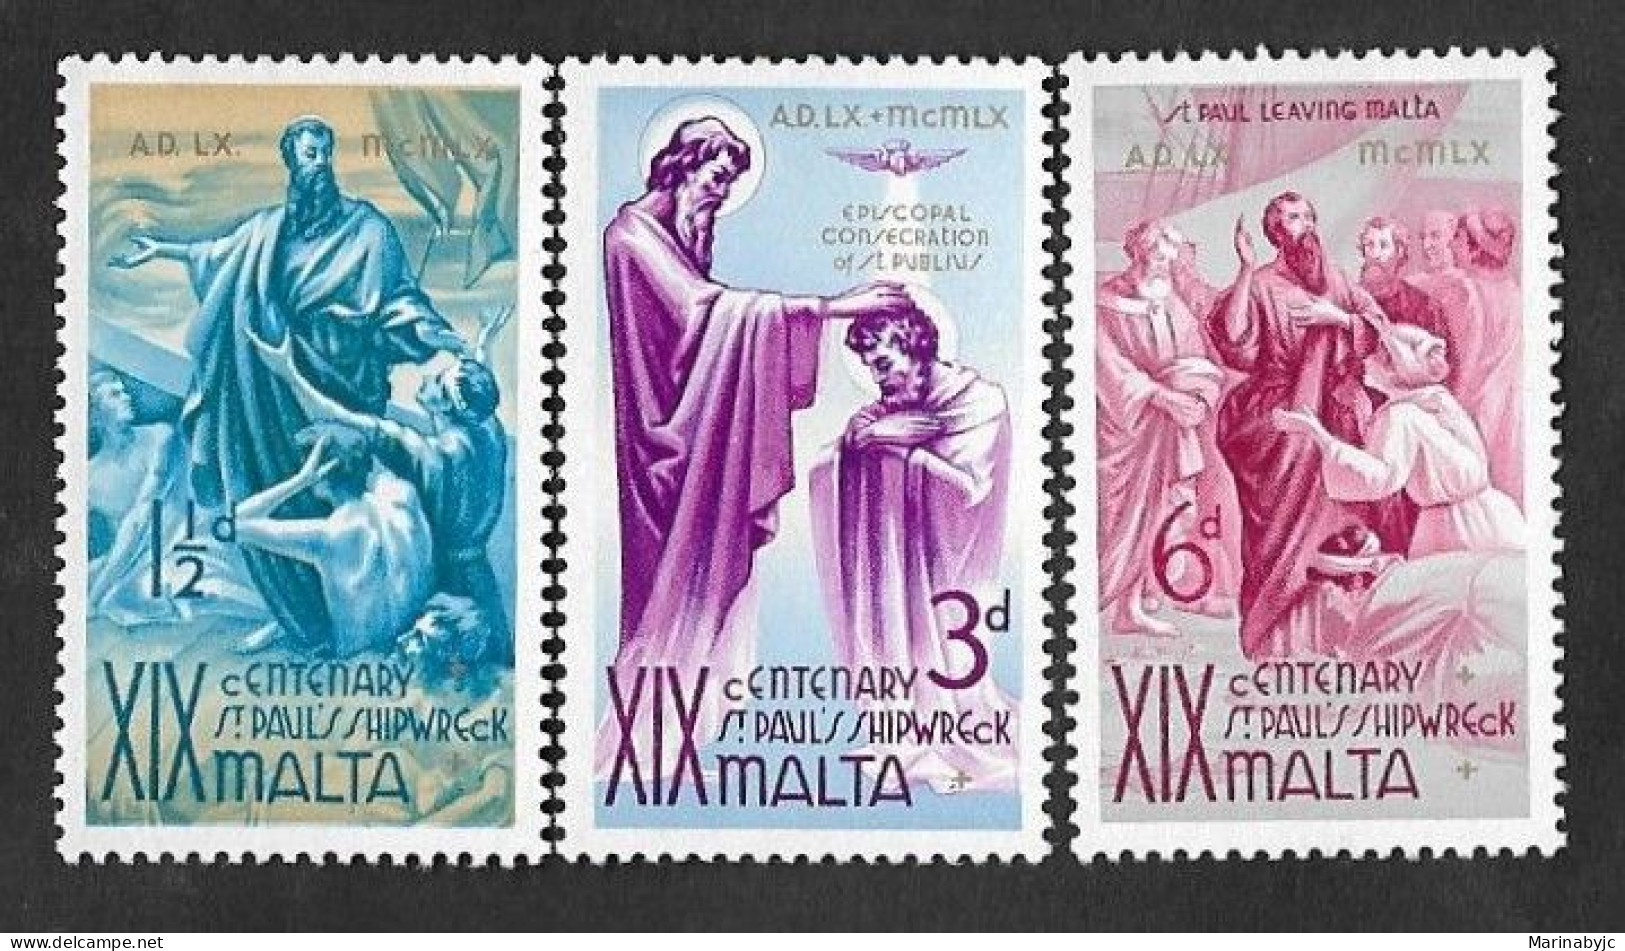 SE)1960 MALTA, 19TH CENTENARY OF THE SHIPWRECK OF ST. PAUL, CONSECRATION OF ST. PAUL, DEPARTURE OF ST. PAUL FROM MALTA, - Malte